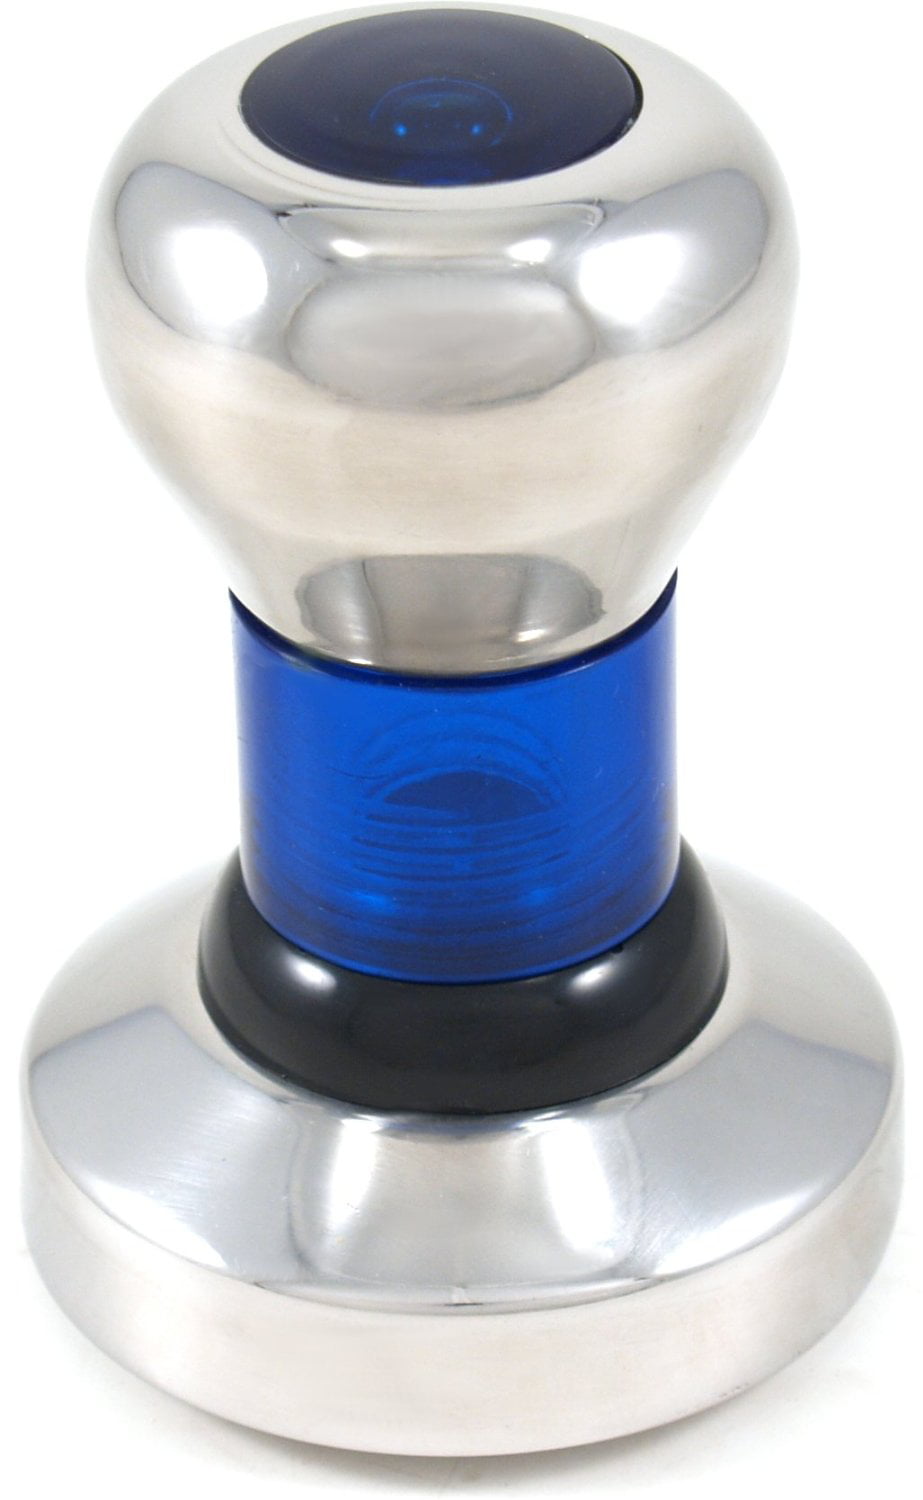 Details about   Blue Stainless Steel Coffee Tamper Espresso Tamper Base Coffee Bean Press USA 